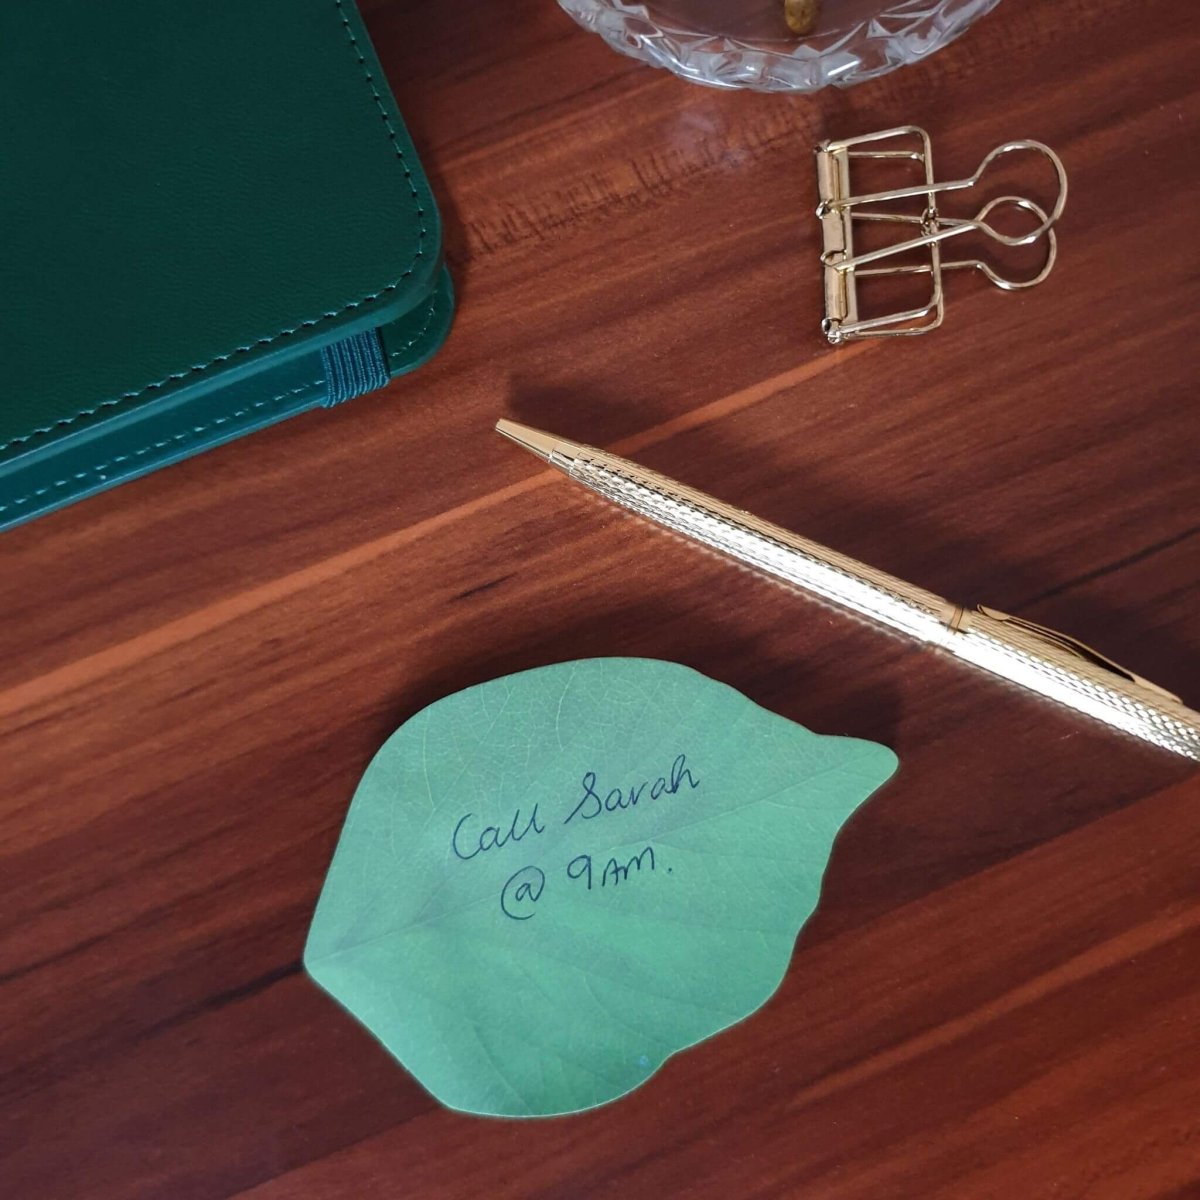 leaf shaped sticky notes on desk with pen and planner